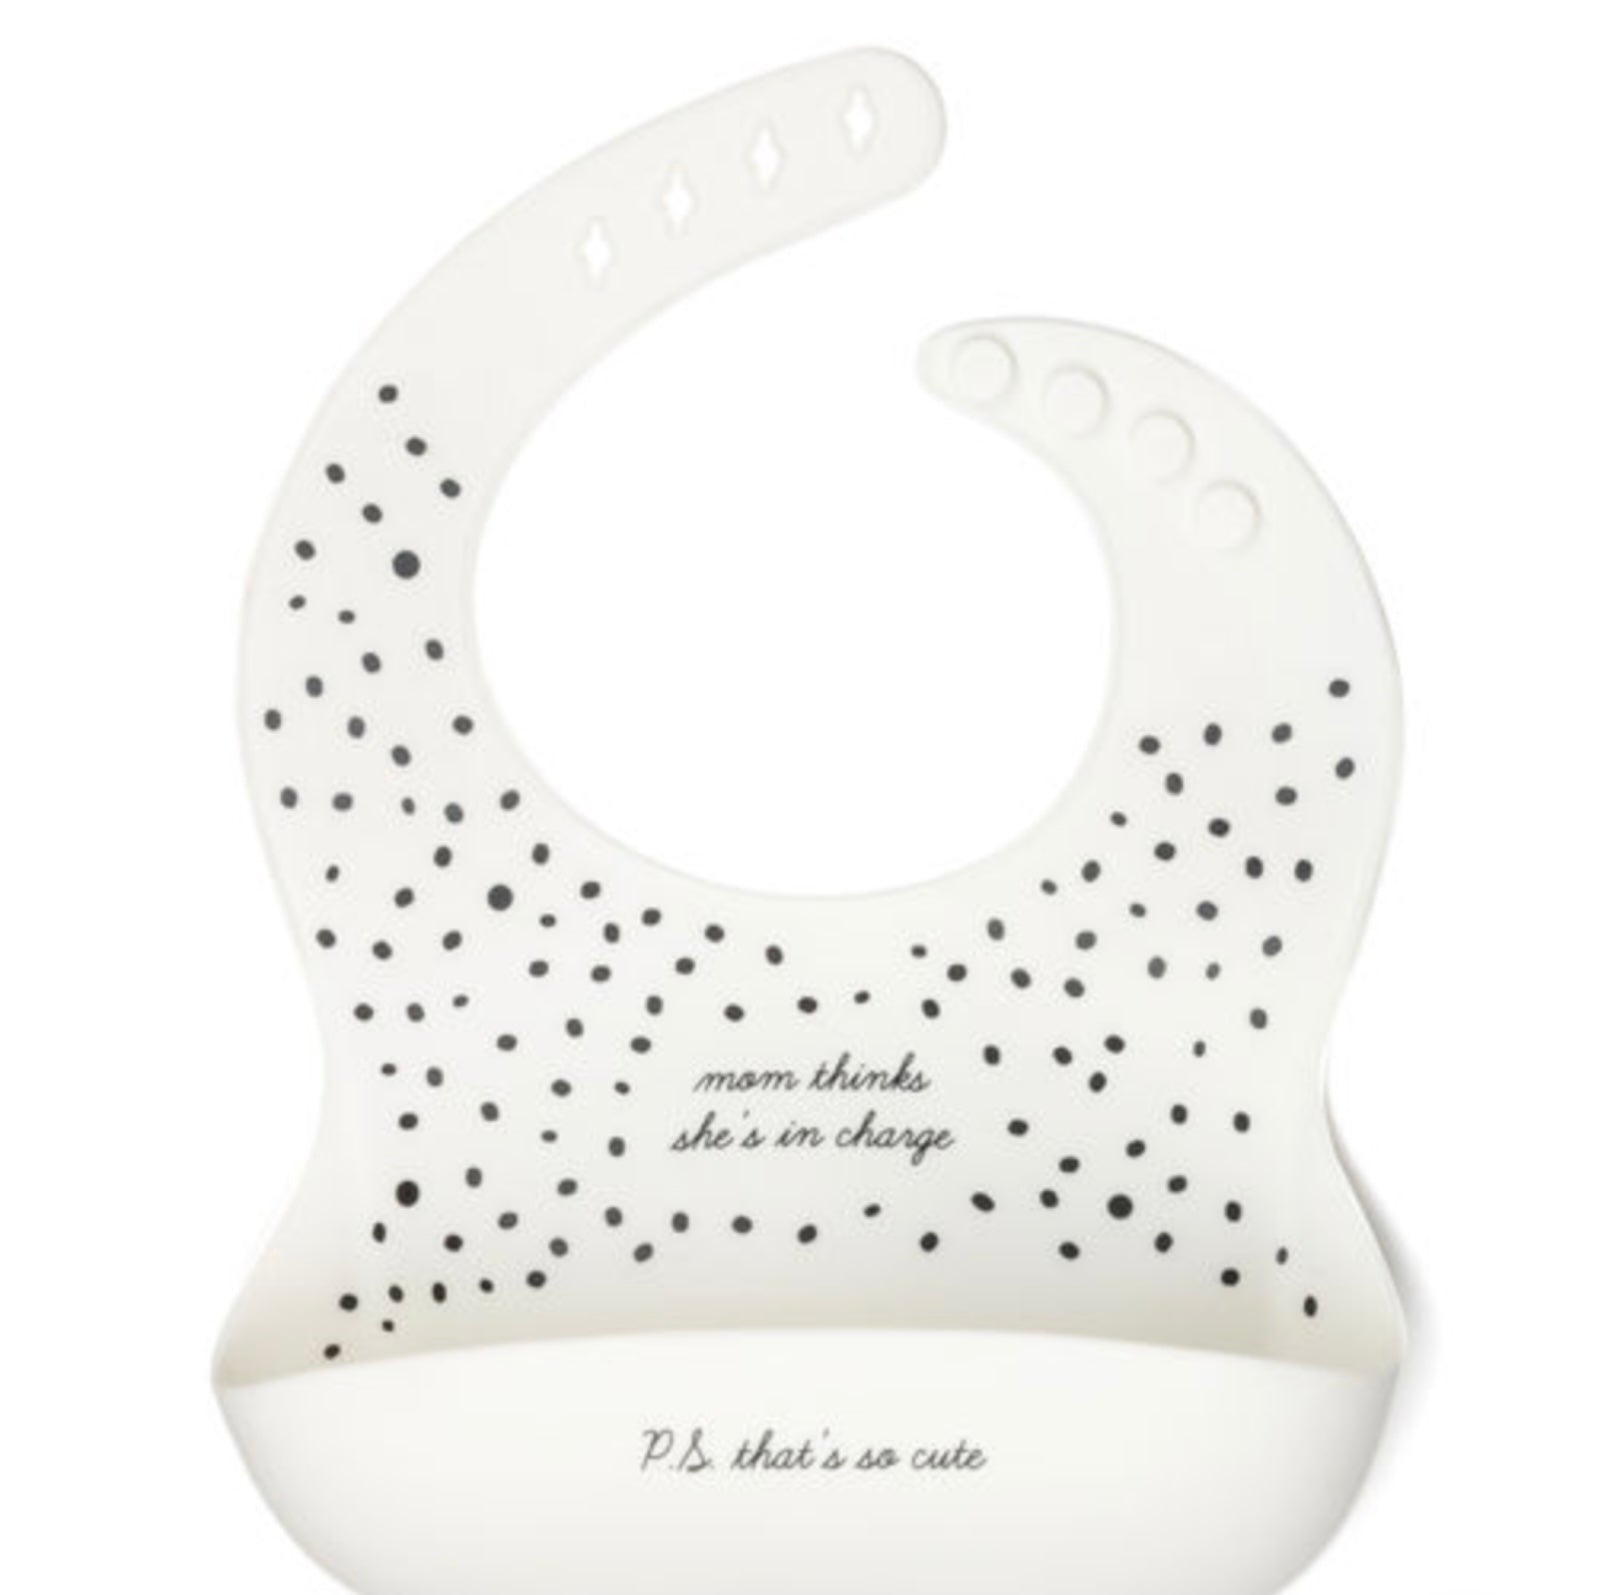 Silicone bib from about face designs